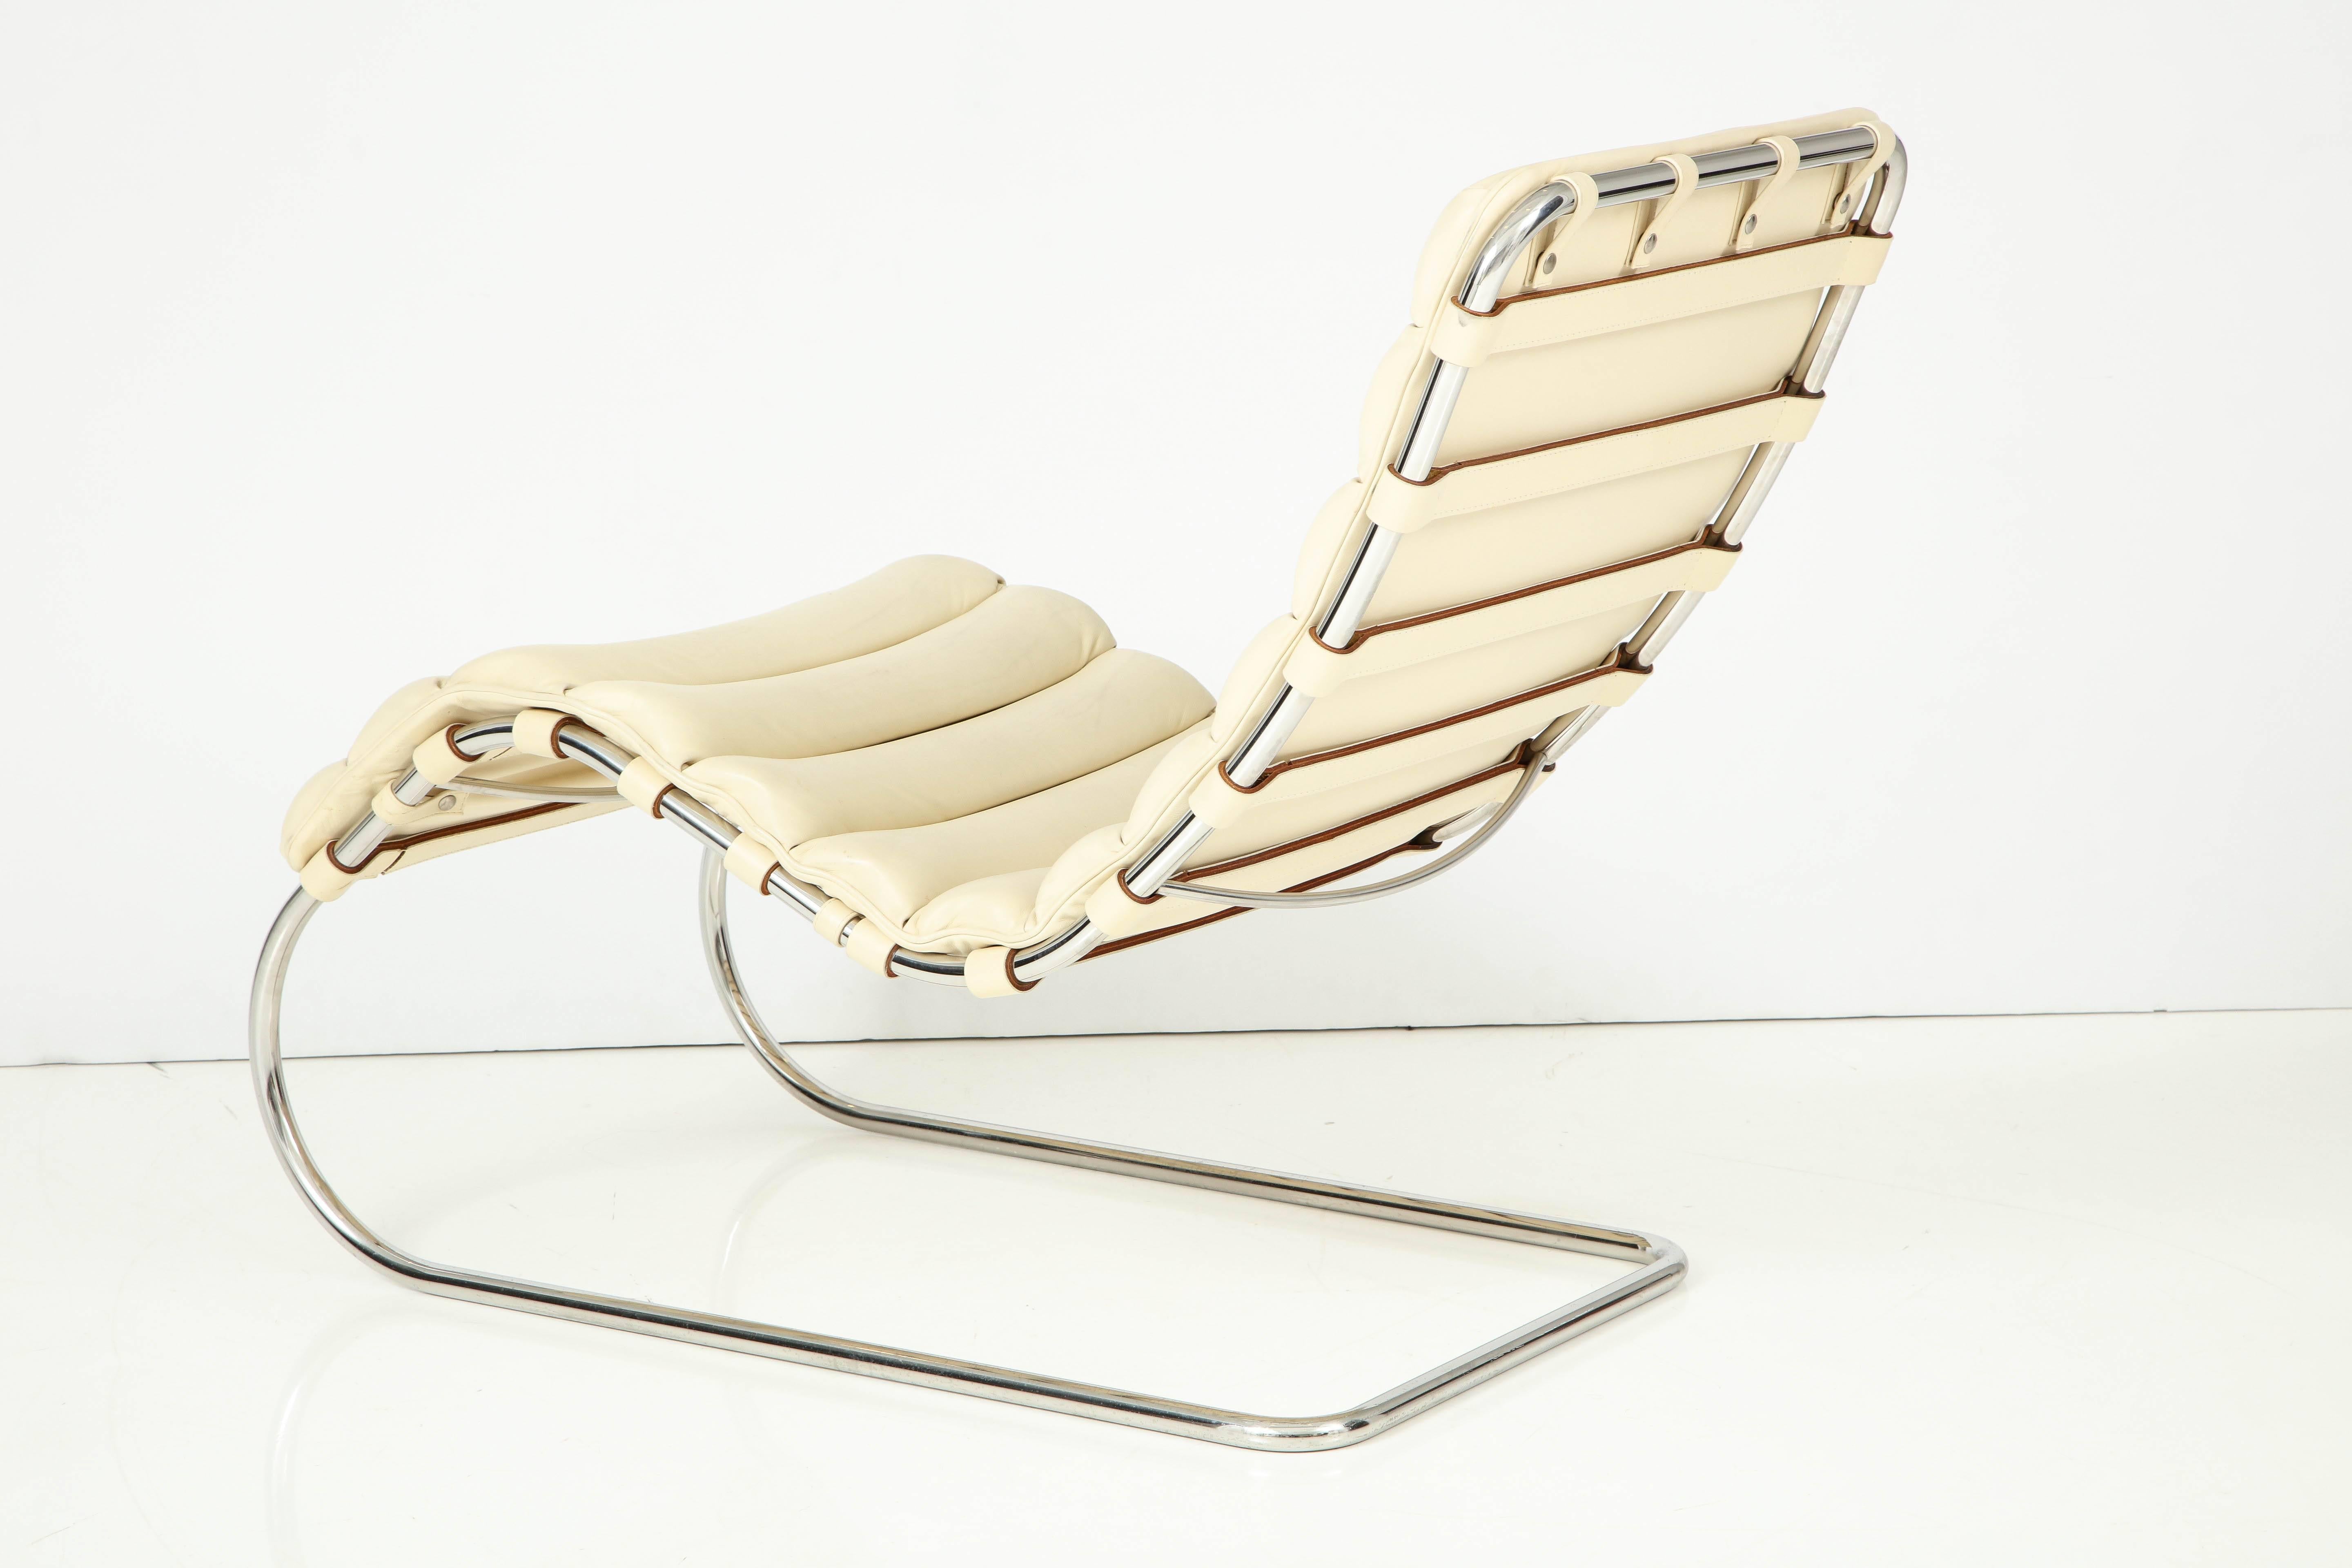 Stainless Steel Ludwig Mies van der Rohe MR Chaise for Knoll, circa 1980s